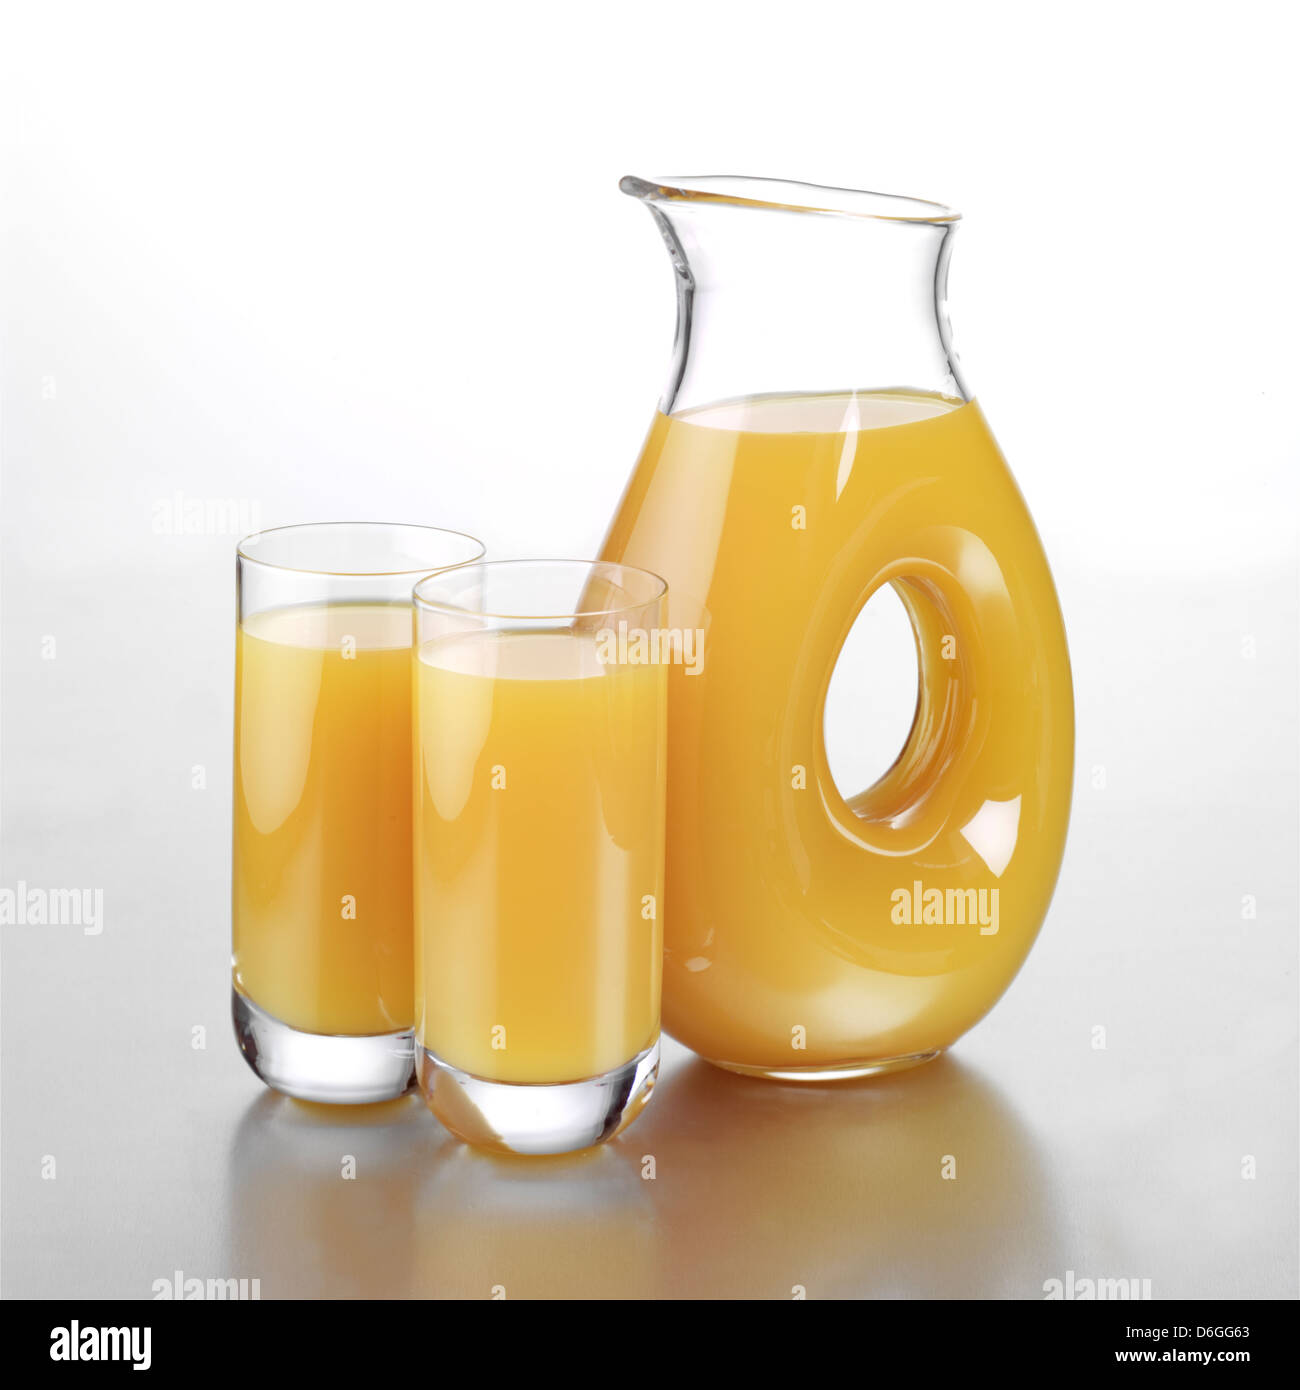 https://c8.alamy.com/comp/D6GG63/jug-of-mango-and-orange-juice-with-two-full-glasses-D6GG63.jpg